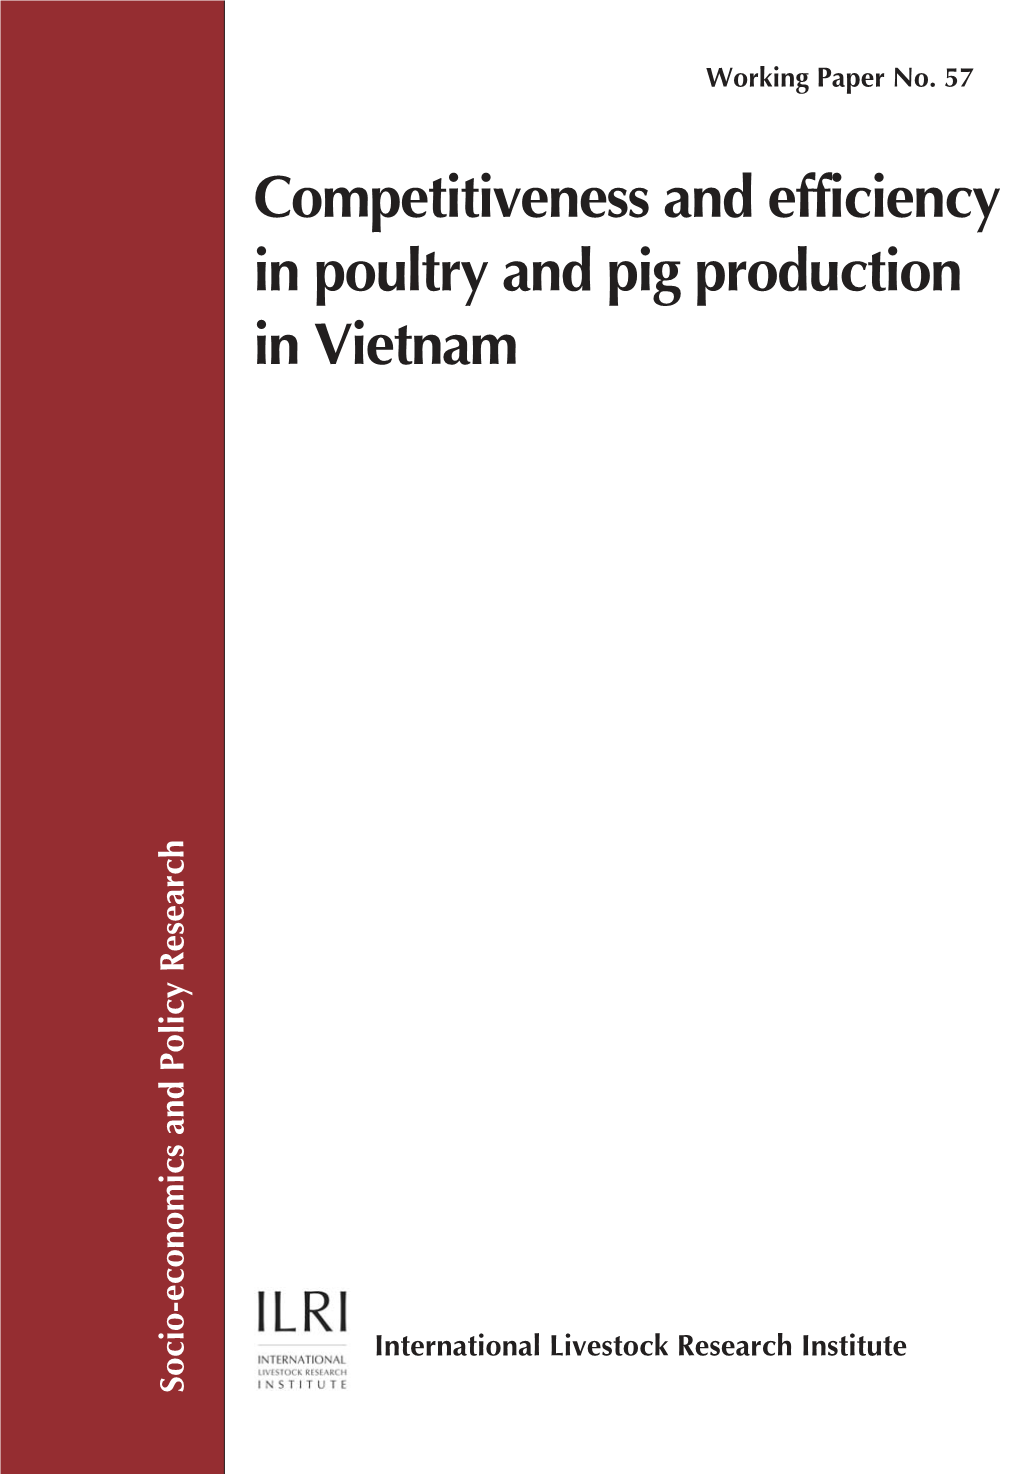 Competitiveness and Efficiency in Poultry and Pig Production in Vietnam